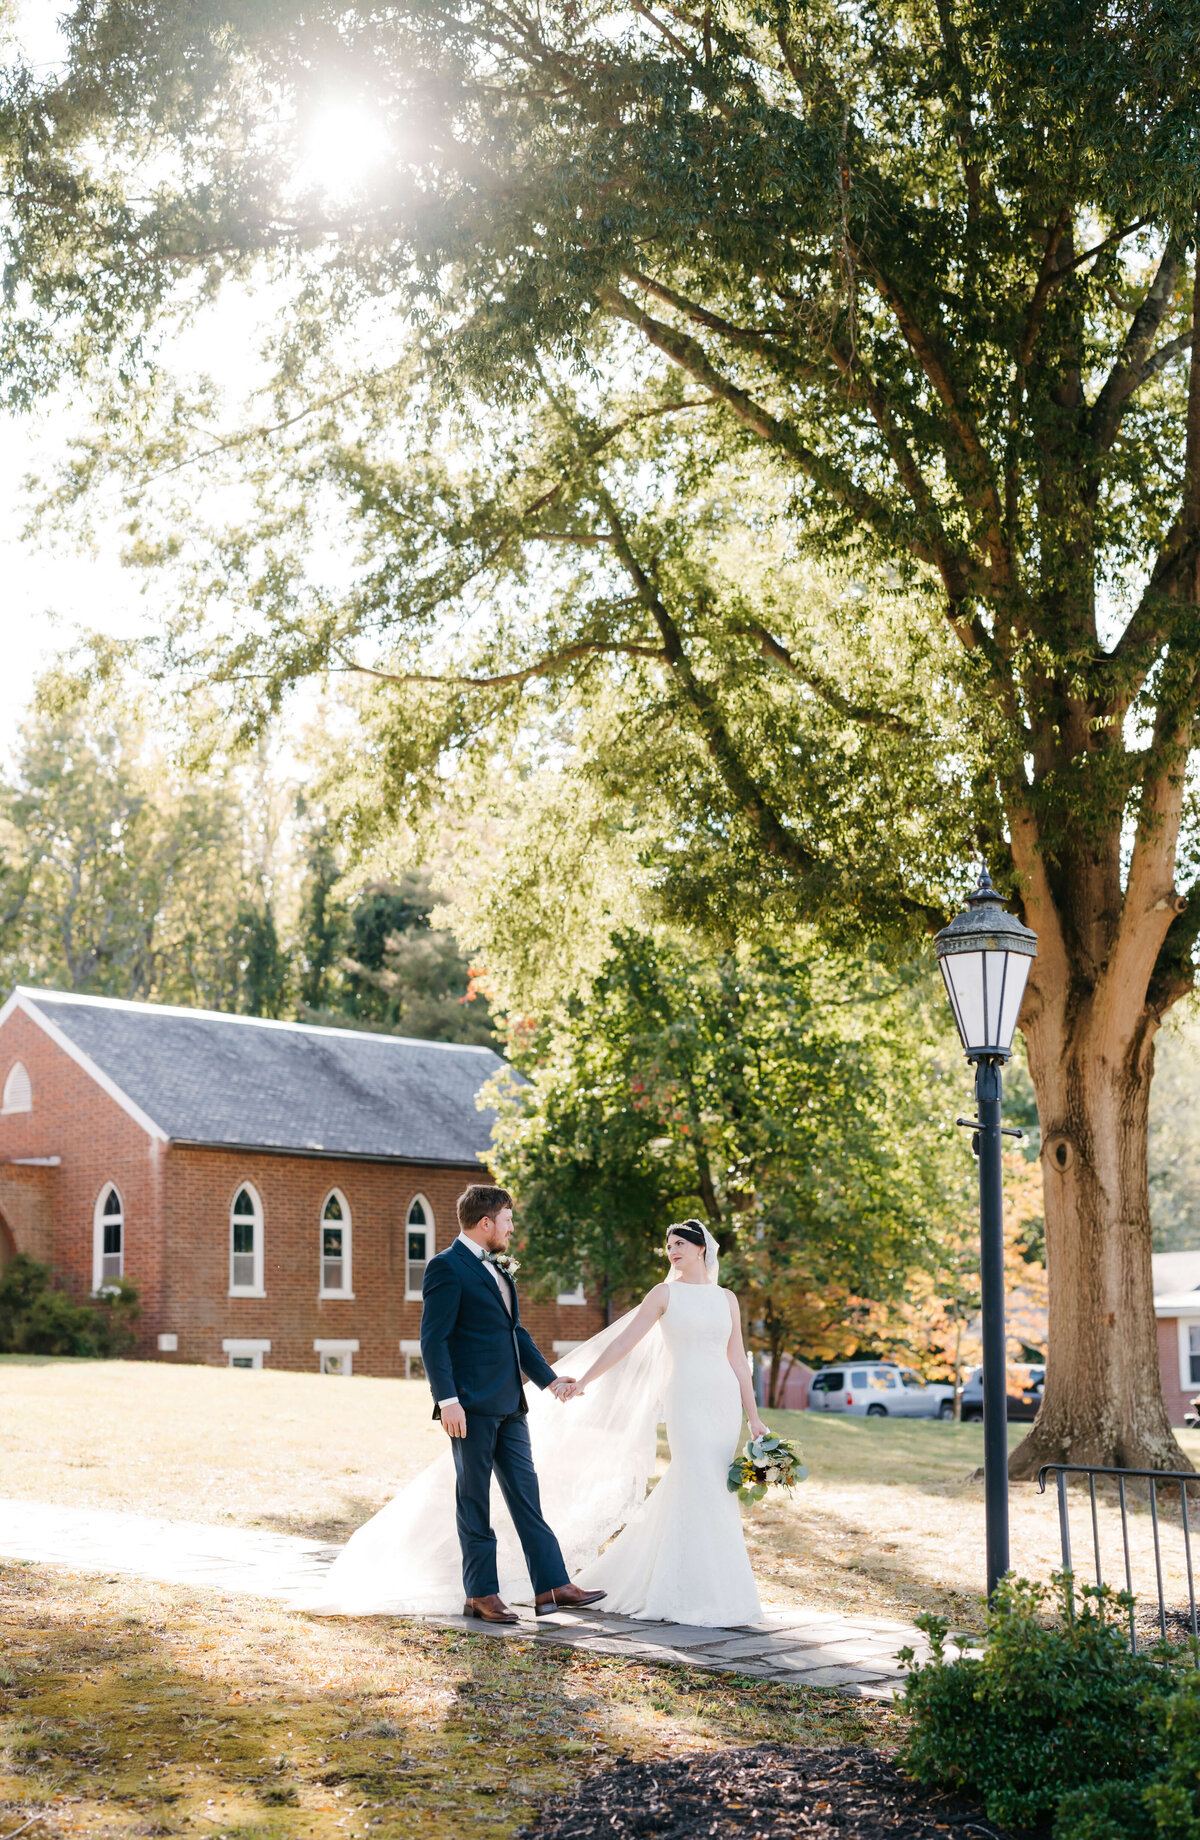 wedding in Richmond va with bride and groom walking down a hill from a wedding chapel while holding hands and being illuminated by the setting sun as they smile at one another as they aproach a old school street lamp leading to a stone path